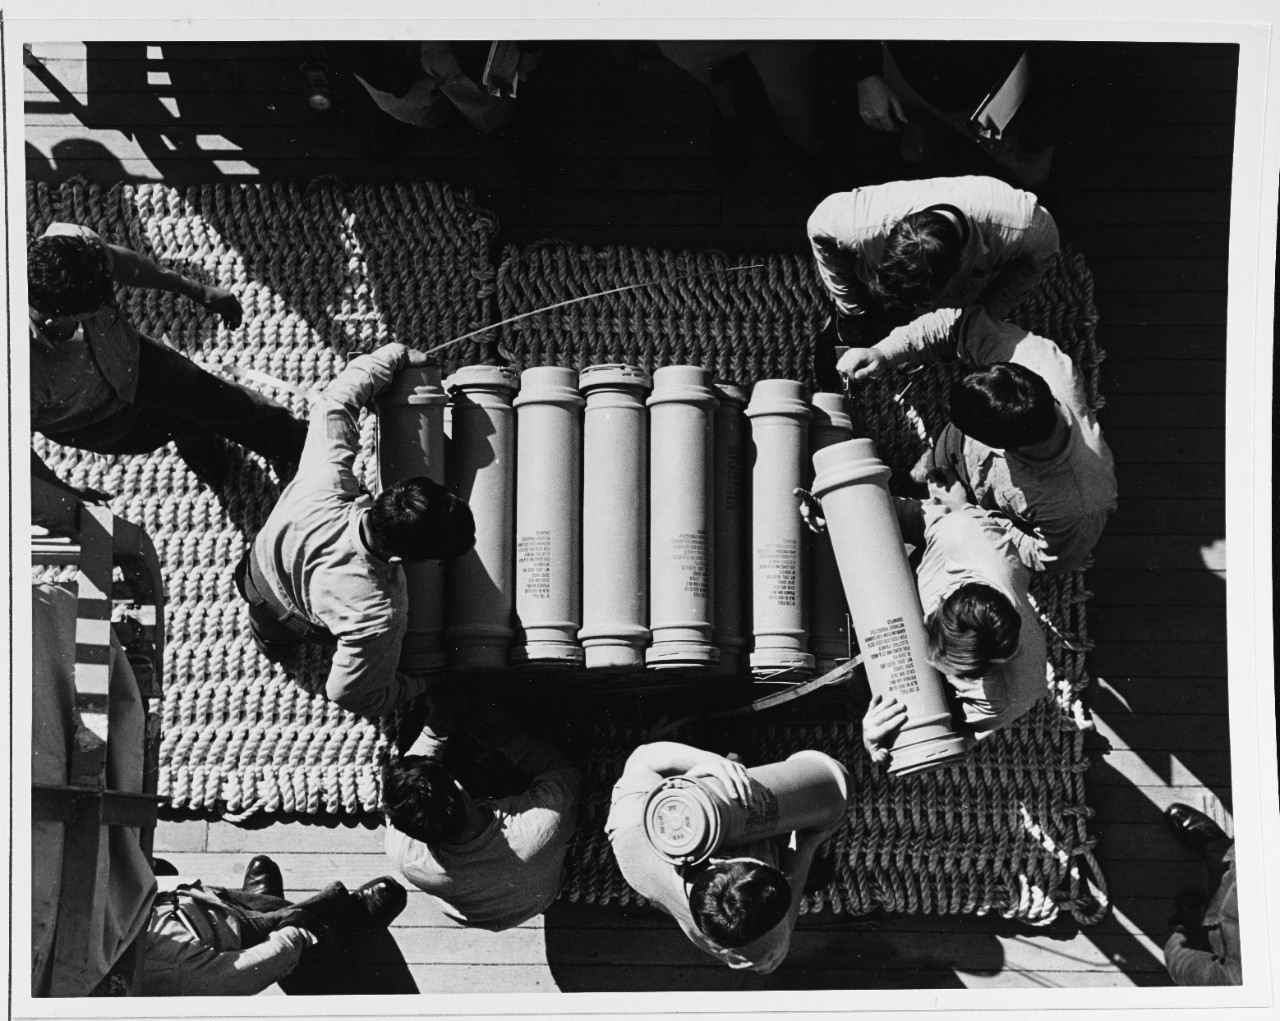 Stowing powder cans, USS NEW JERSEY (BB-62)